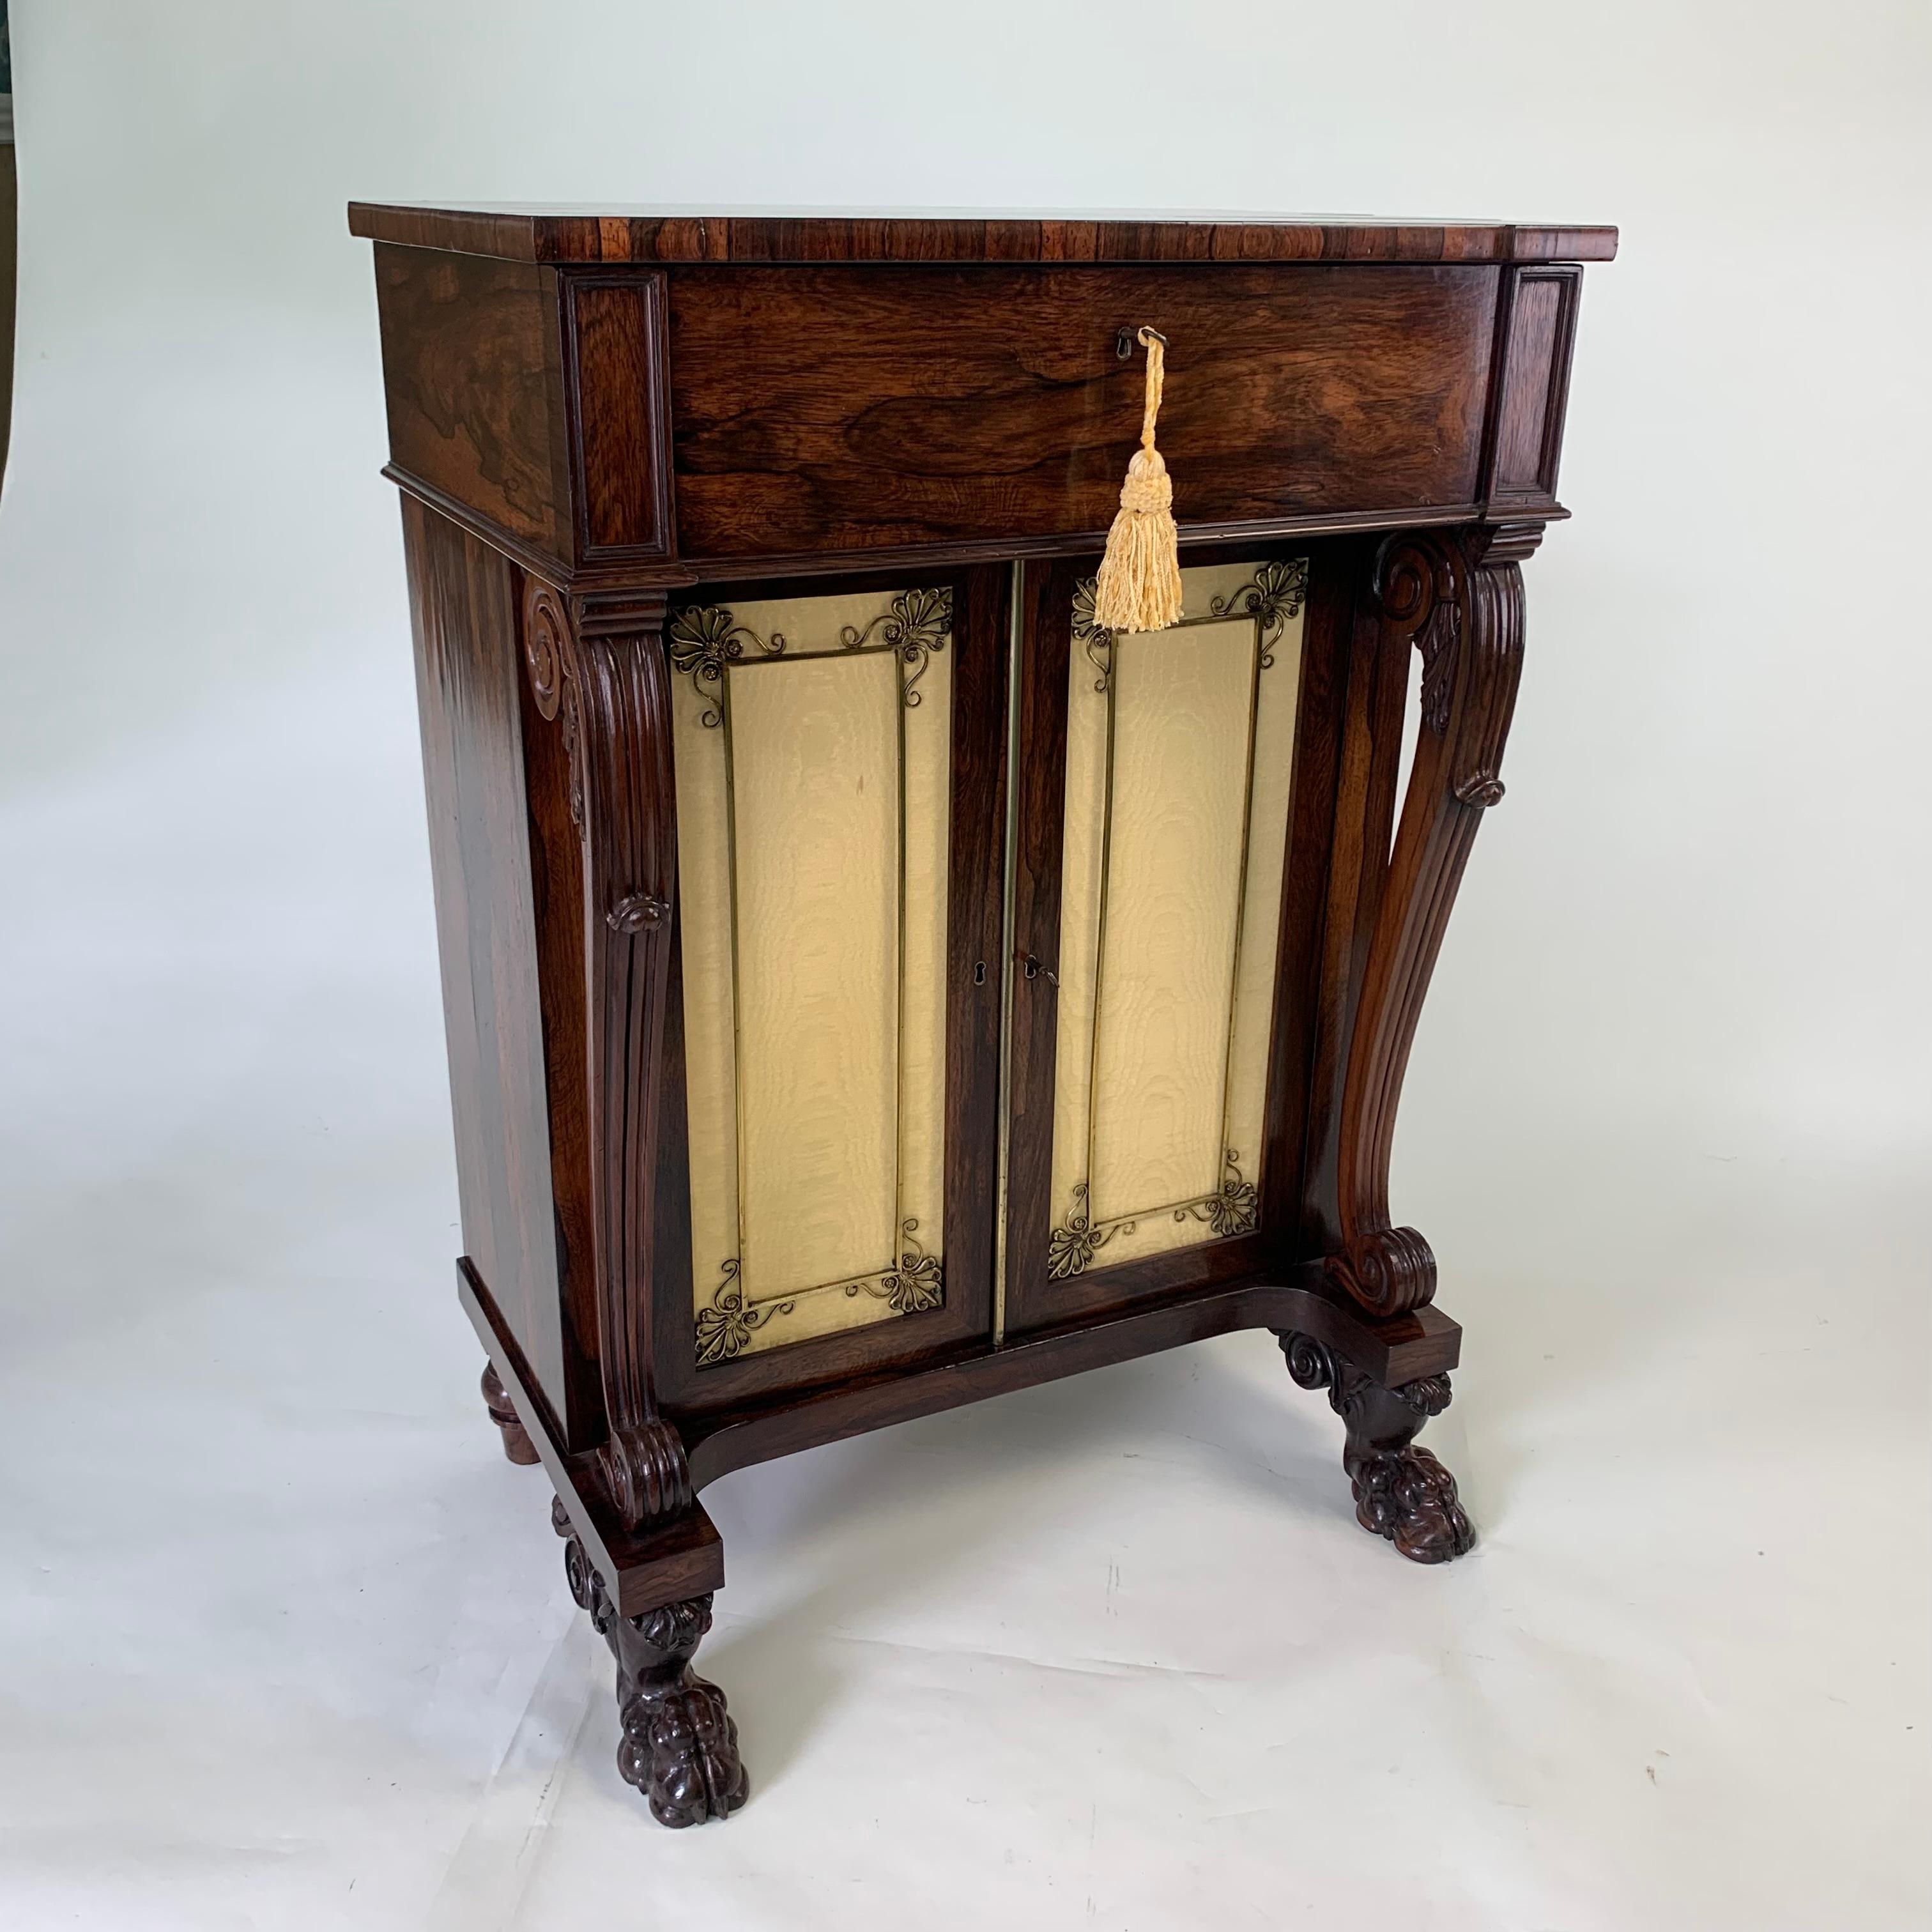 A superior quality and unusual Regency rosewood Side Cabinet, the top drawer with fold-down, leather-lined front, fully fitted with drawers and pigeon holes. below are a pair of silk-lined cupboard doors with original and elaborate brass grills.